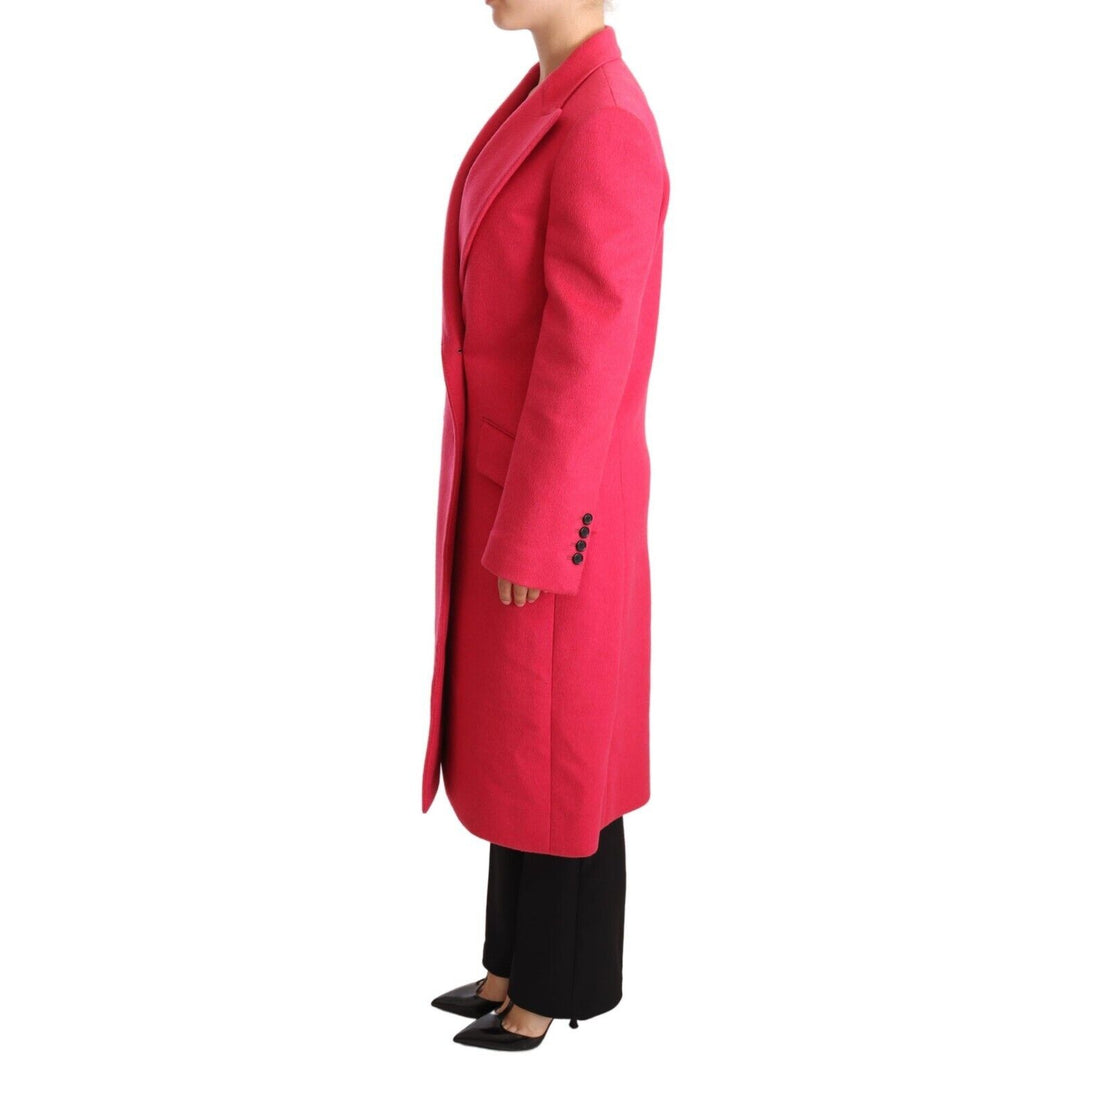 Dolce & Gabbana Pink Double Breasted Trenchcoat Jacket - Paris Deluxe